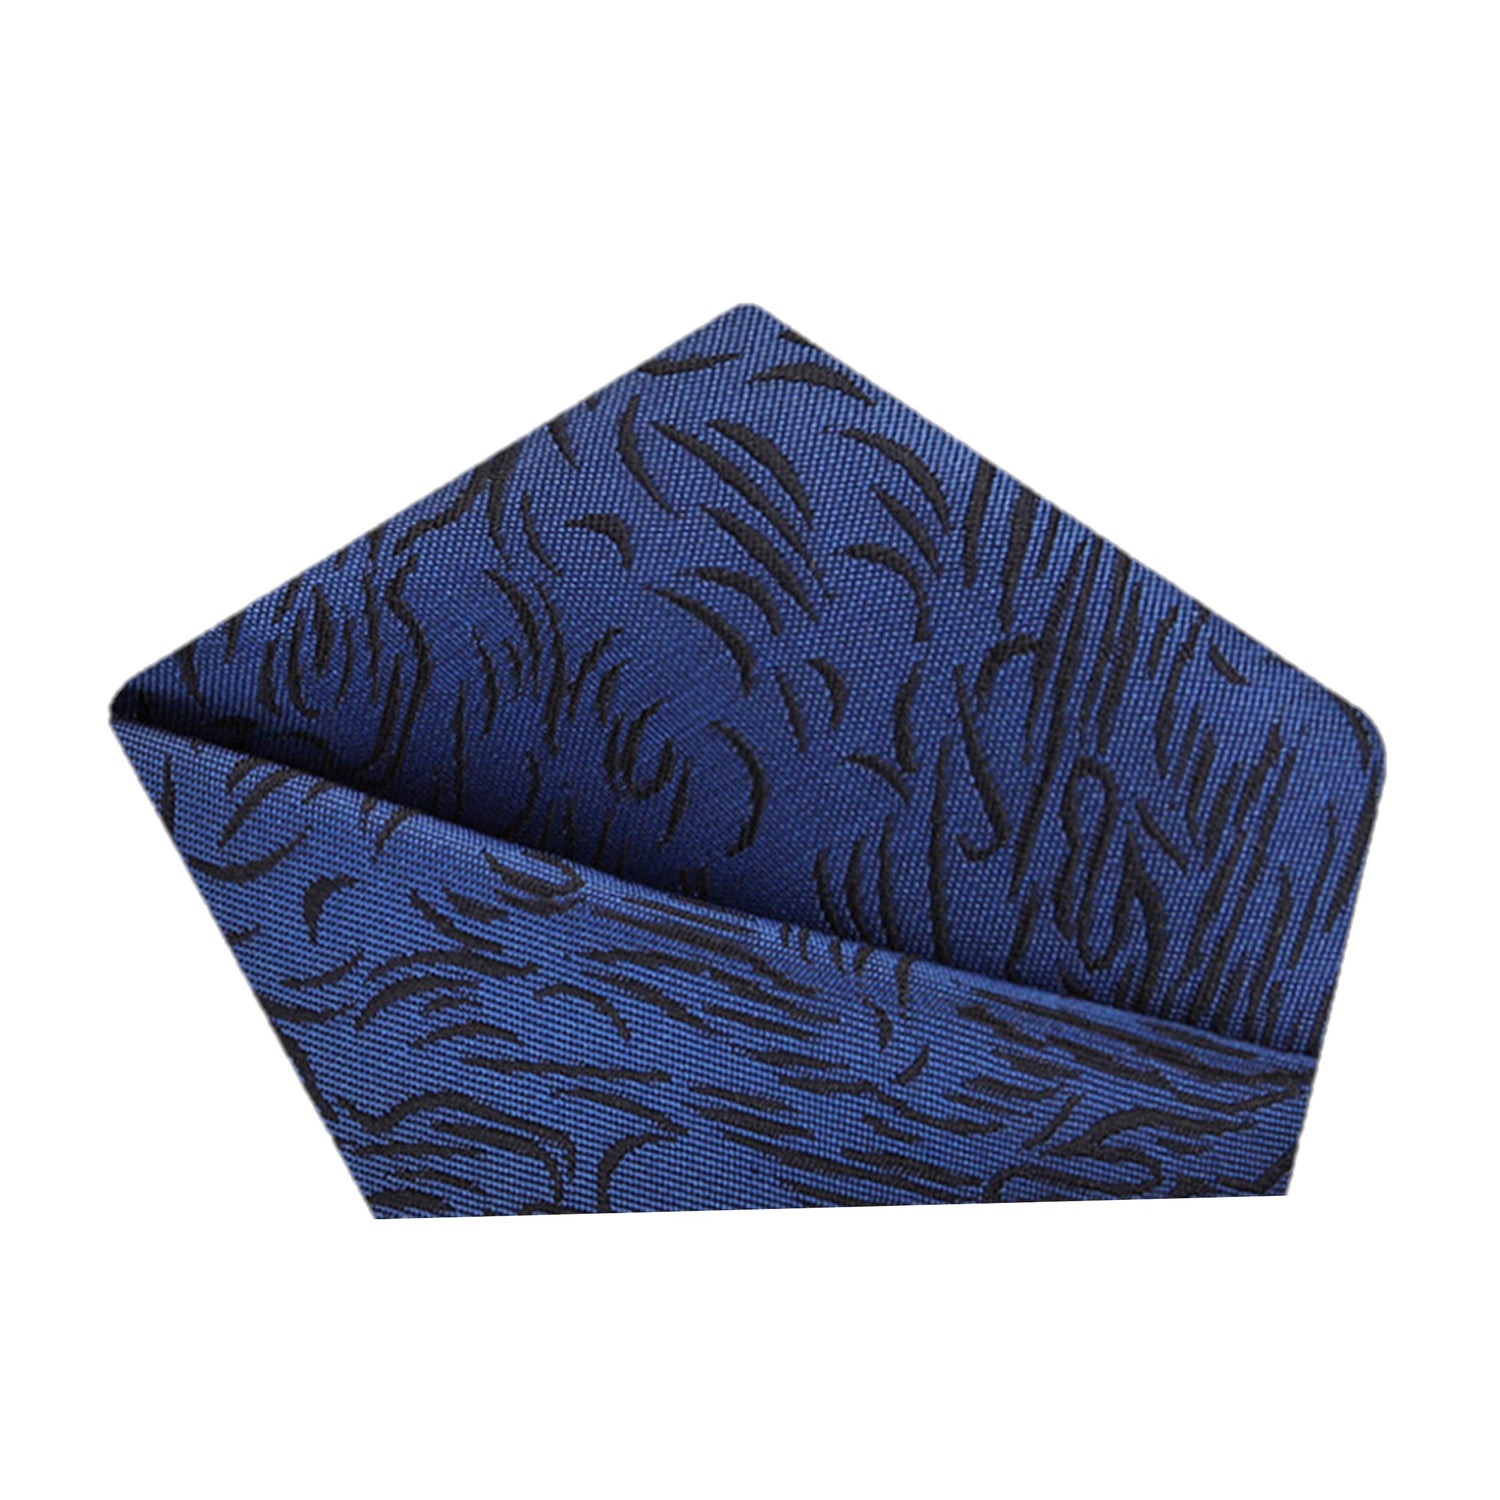 View 2 Navy Blue, Black Abstract Lines Pocket Square